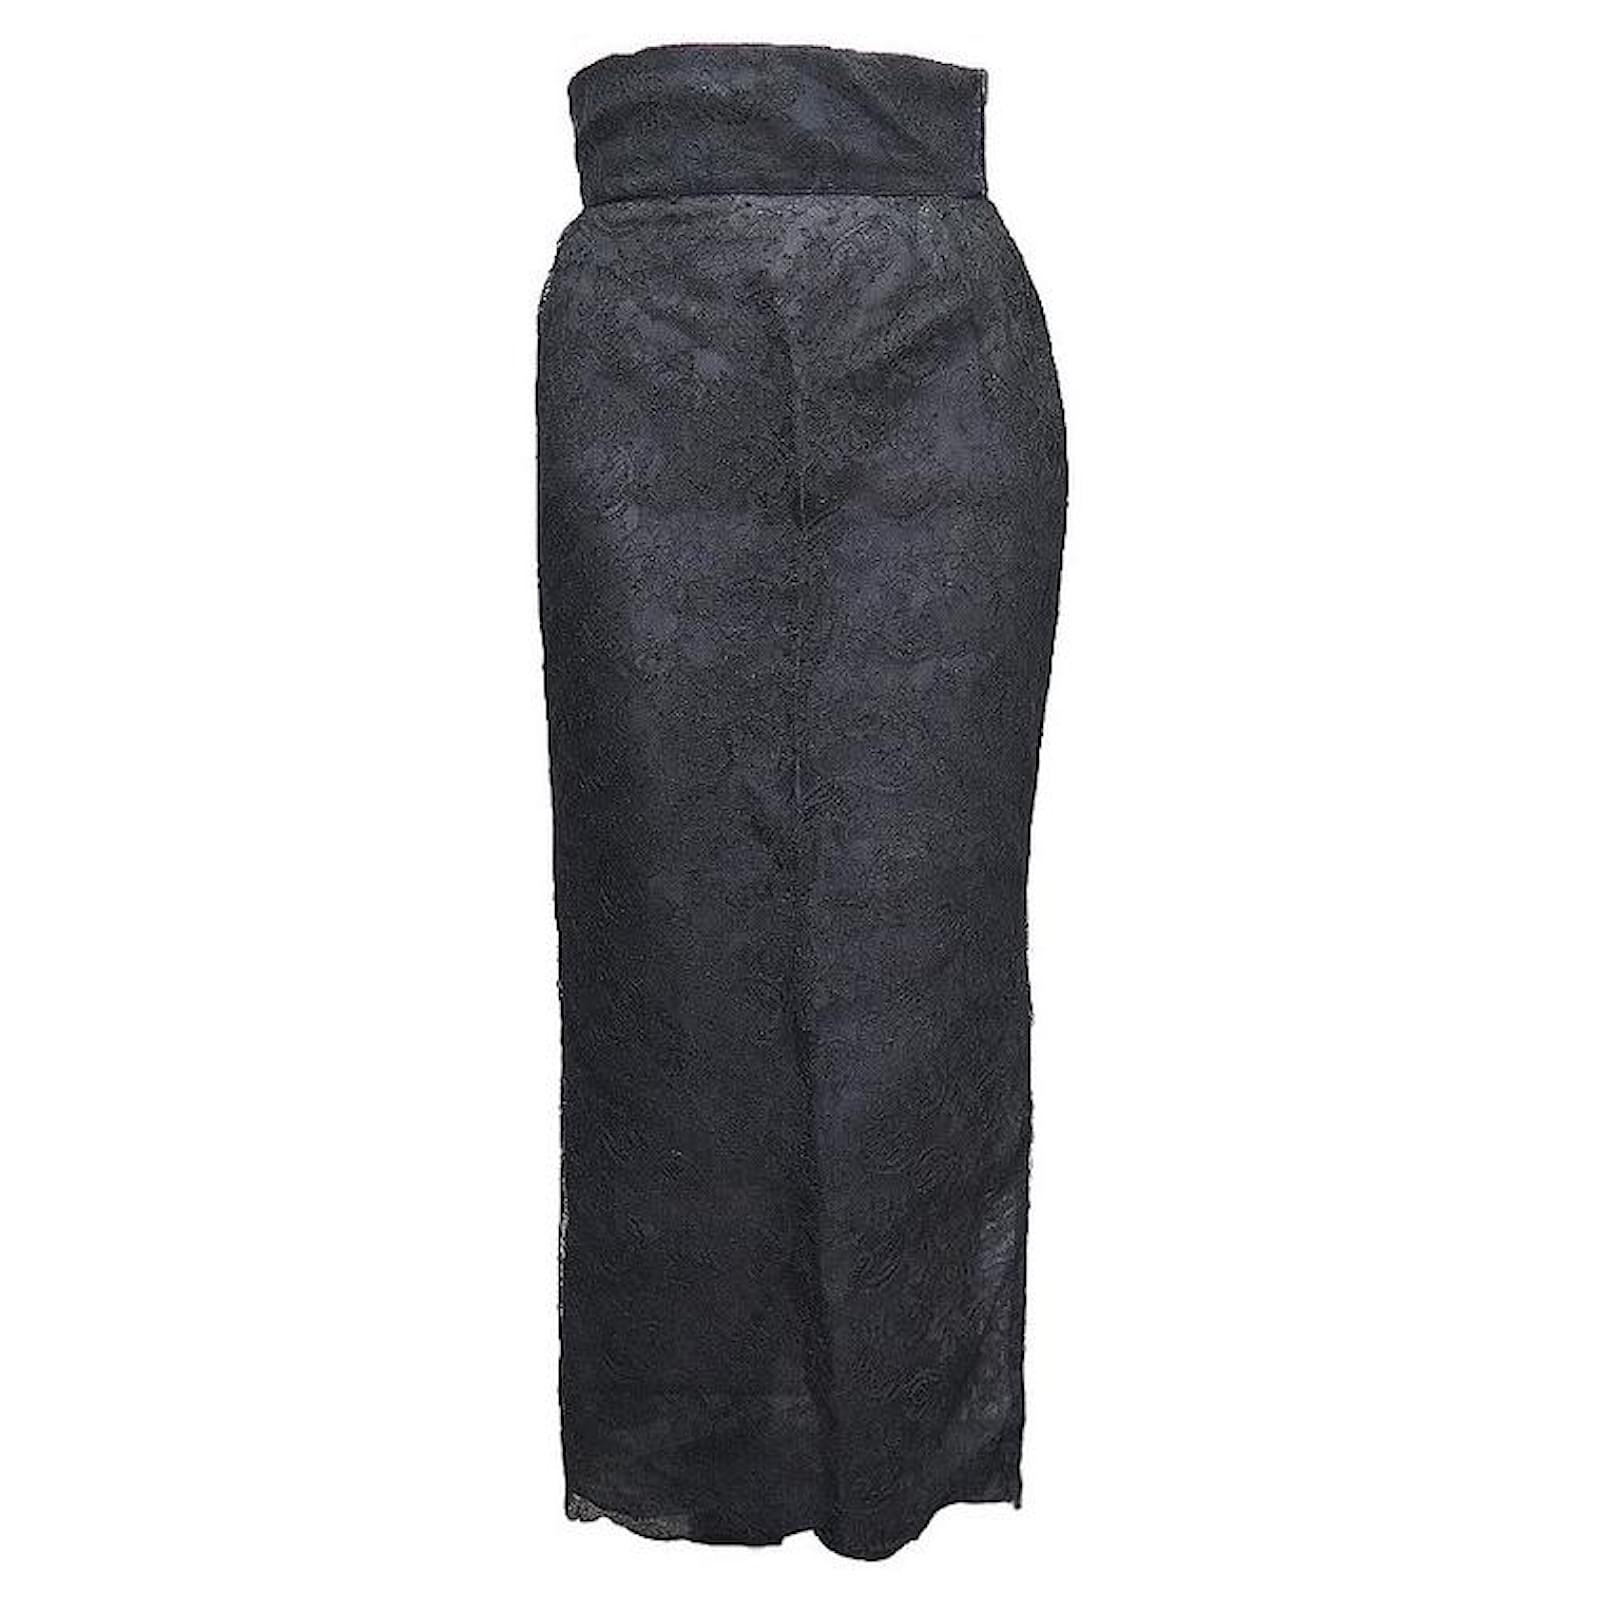 VINTAGE CHANEL LONG SKIRT IN SYNTHETIC LACE 22230 black 34 XS SKIRT  ref.894598 - Joli Closet